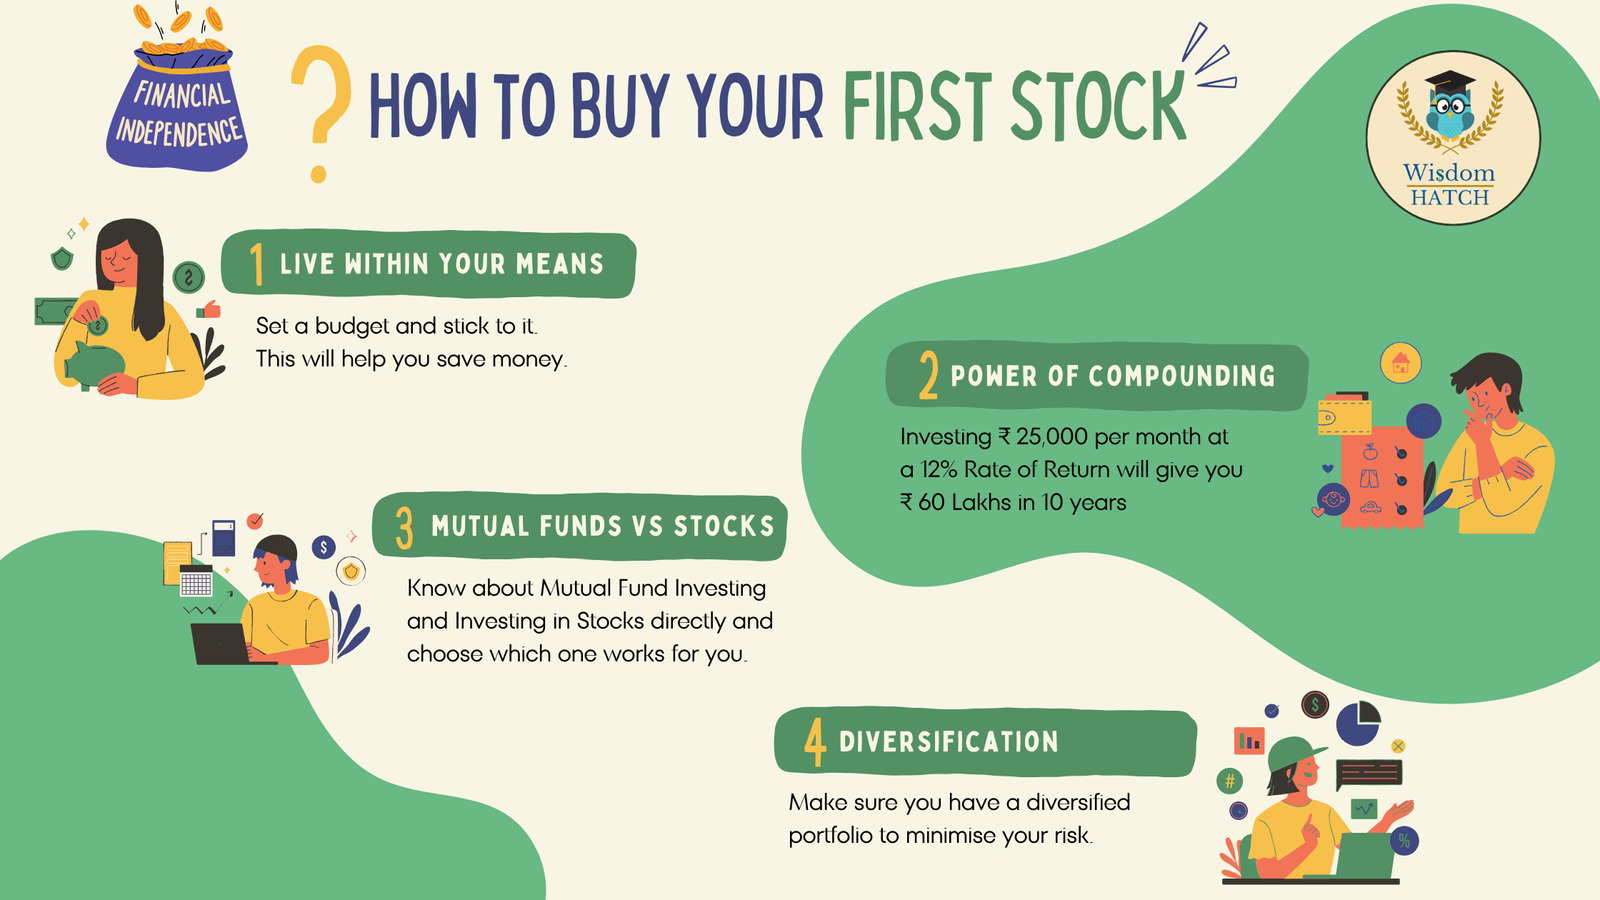 How to Buy a Stock for the First Time